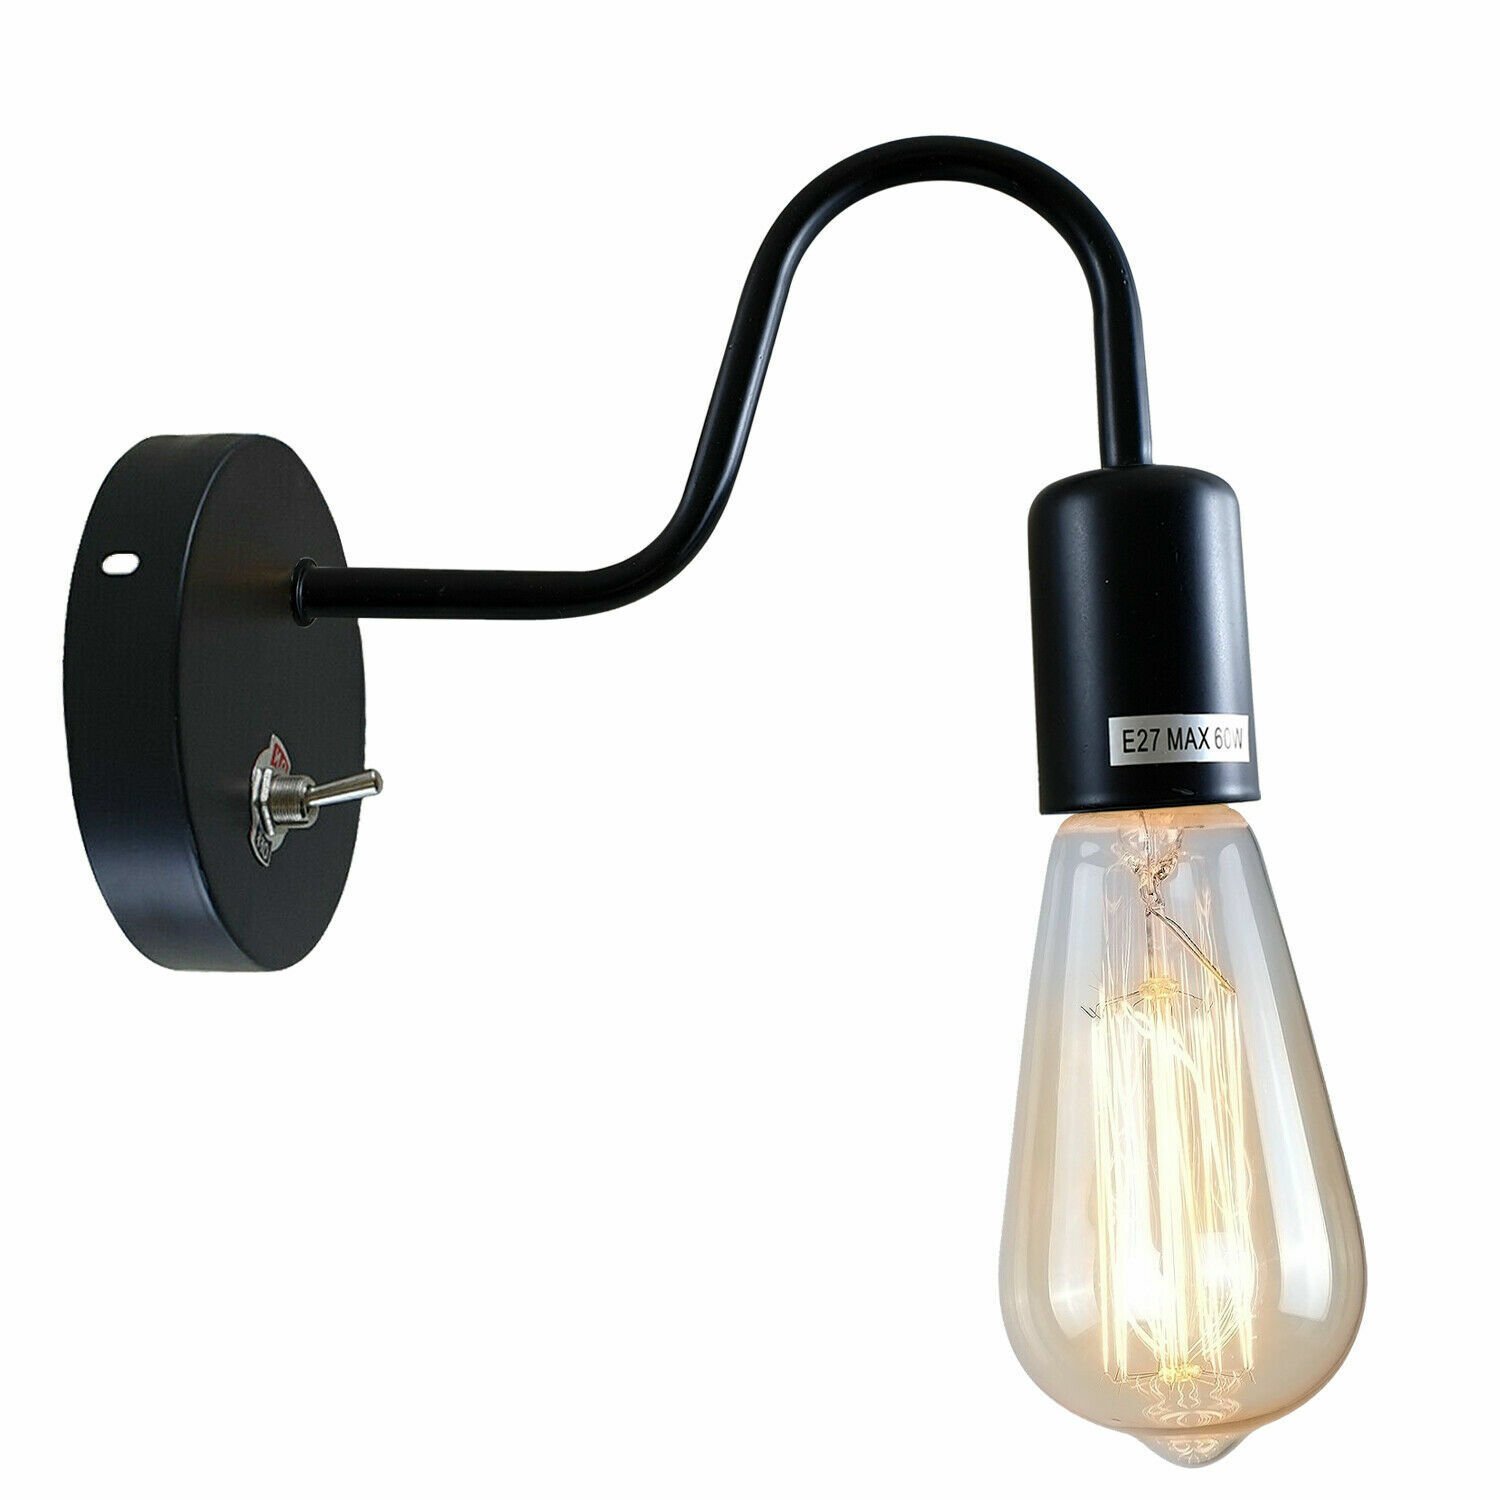 Vintage E27 Industrial Wall Sconce Lamp Holder Retro Black Wall Light Fixtures - Picture 17 of 18